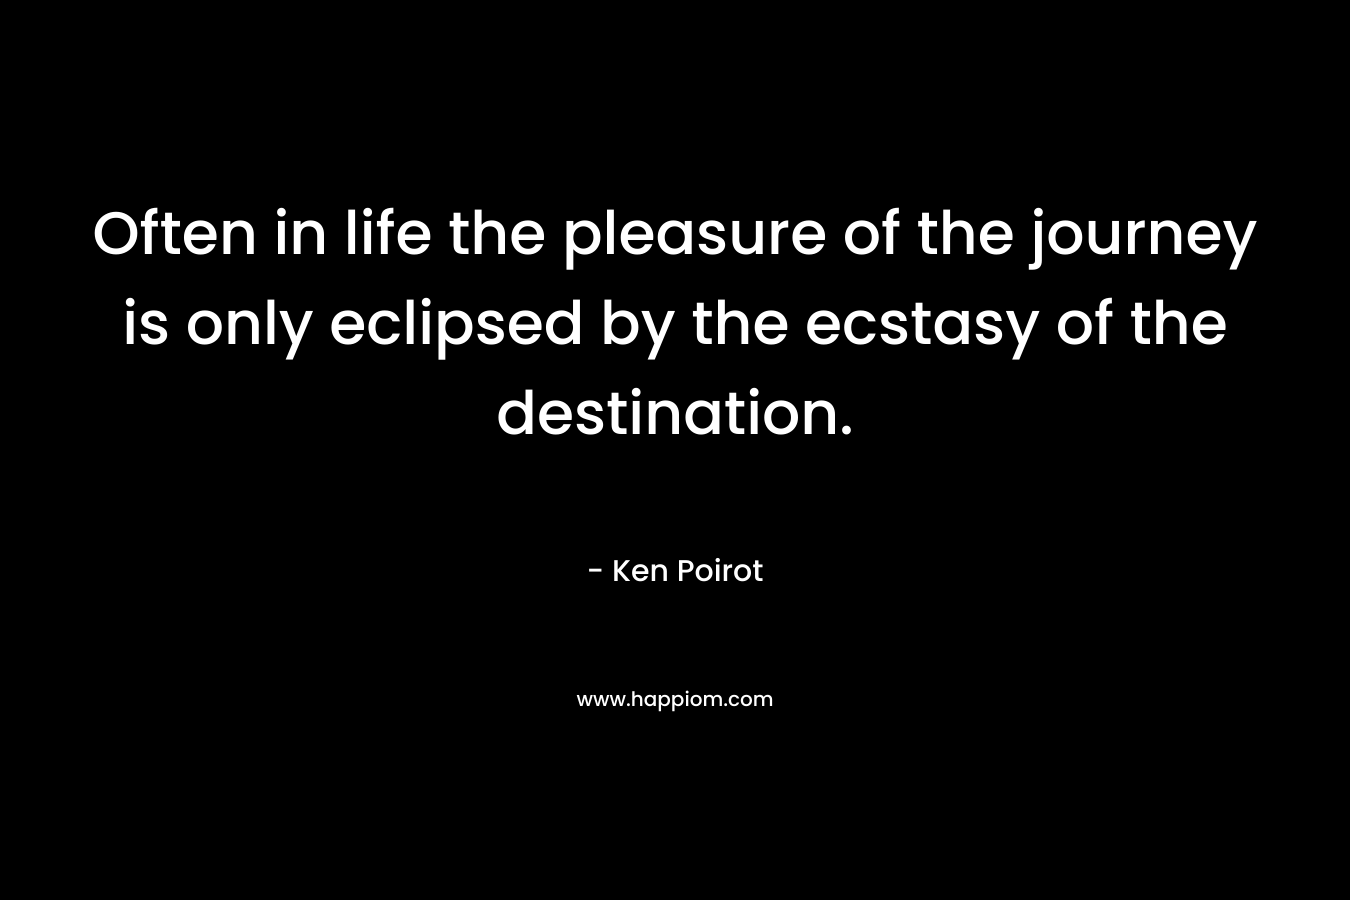 Often in life the pleasure of the journey is only eclipsed by the ecstasy of the destination.